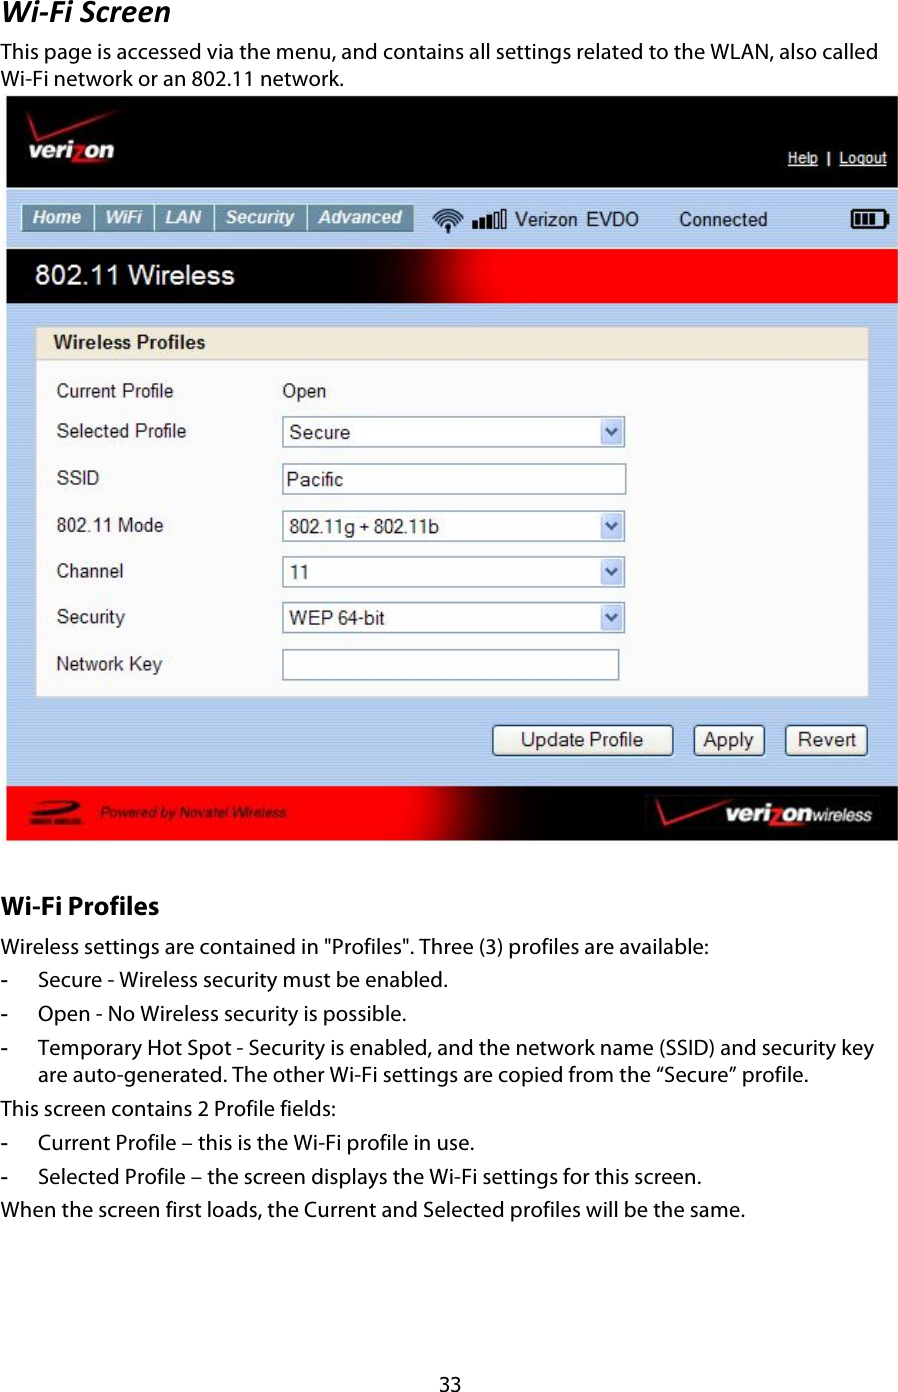  33 @9UI9$1.6##:$This page is accessed via the menu, and contains all settings related to the WLAN, also called Wi-Fi network or an 802.11 network.  Wi-Fi Profiles Wireless settings are contained in &quot;Profiles&quot;. Three (3) profiles are available: -  Secure - Wireless security must be enabled. -  Open - No Wireless security is possible. -  Temporary Hot Spot - Security is enabled, and the network name (SSID) and security key are auto-generated. The other Wi-Fi settings are copied from the “Secure” profile. This screen contains 2 Profile fields: -  Current Profile – this is the Wi-Fi profile in use. -  Selected Profile – the screen displays the Wi-Fi settings for this screen.  When the screen first loads, the Current and Selected profiles will be the same. 